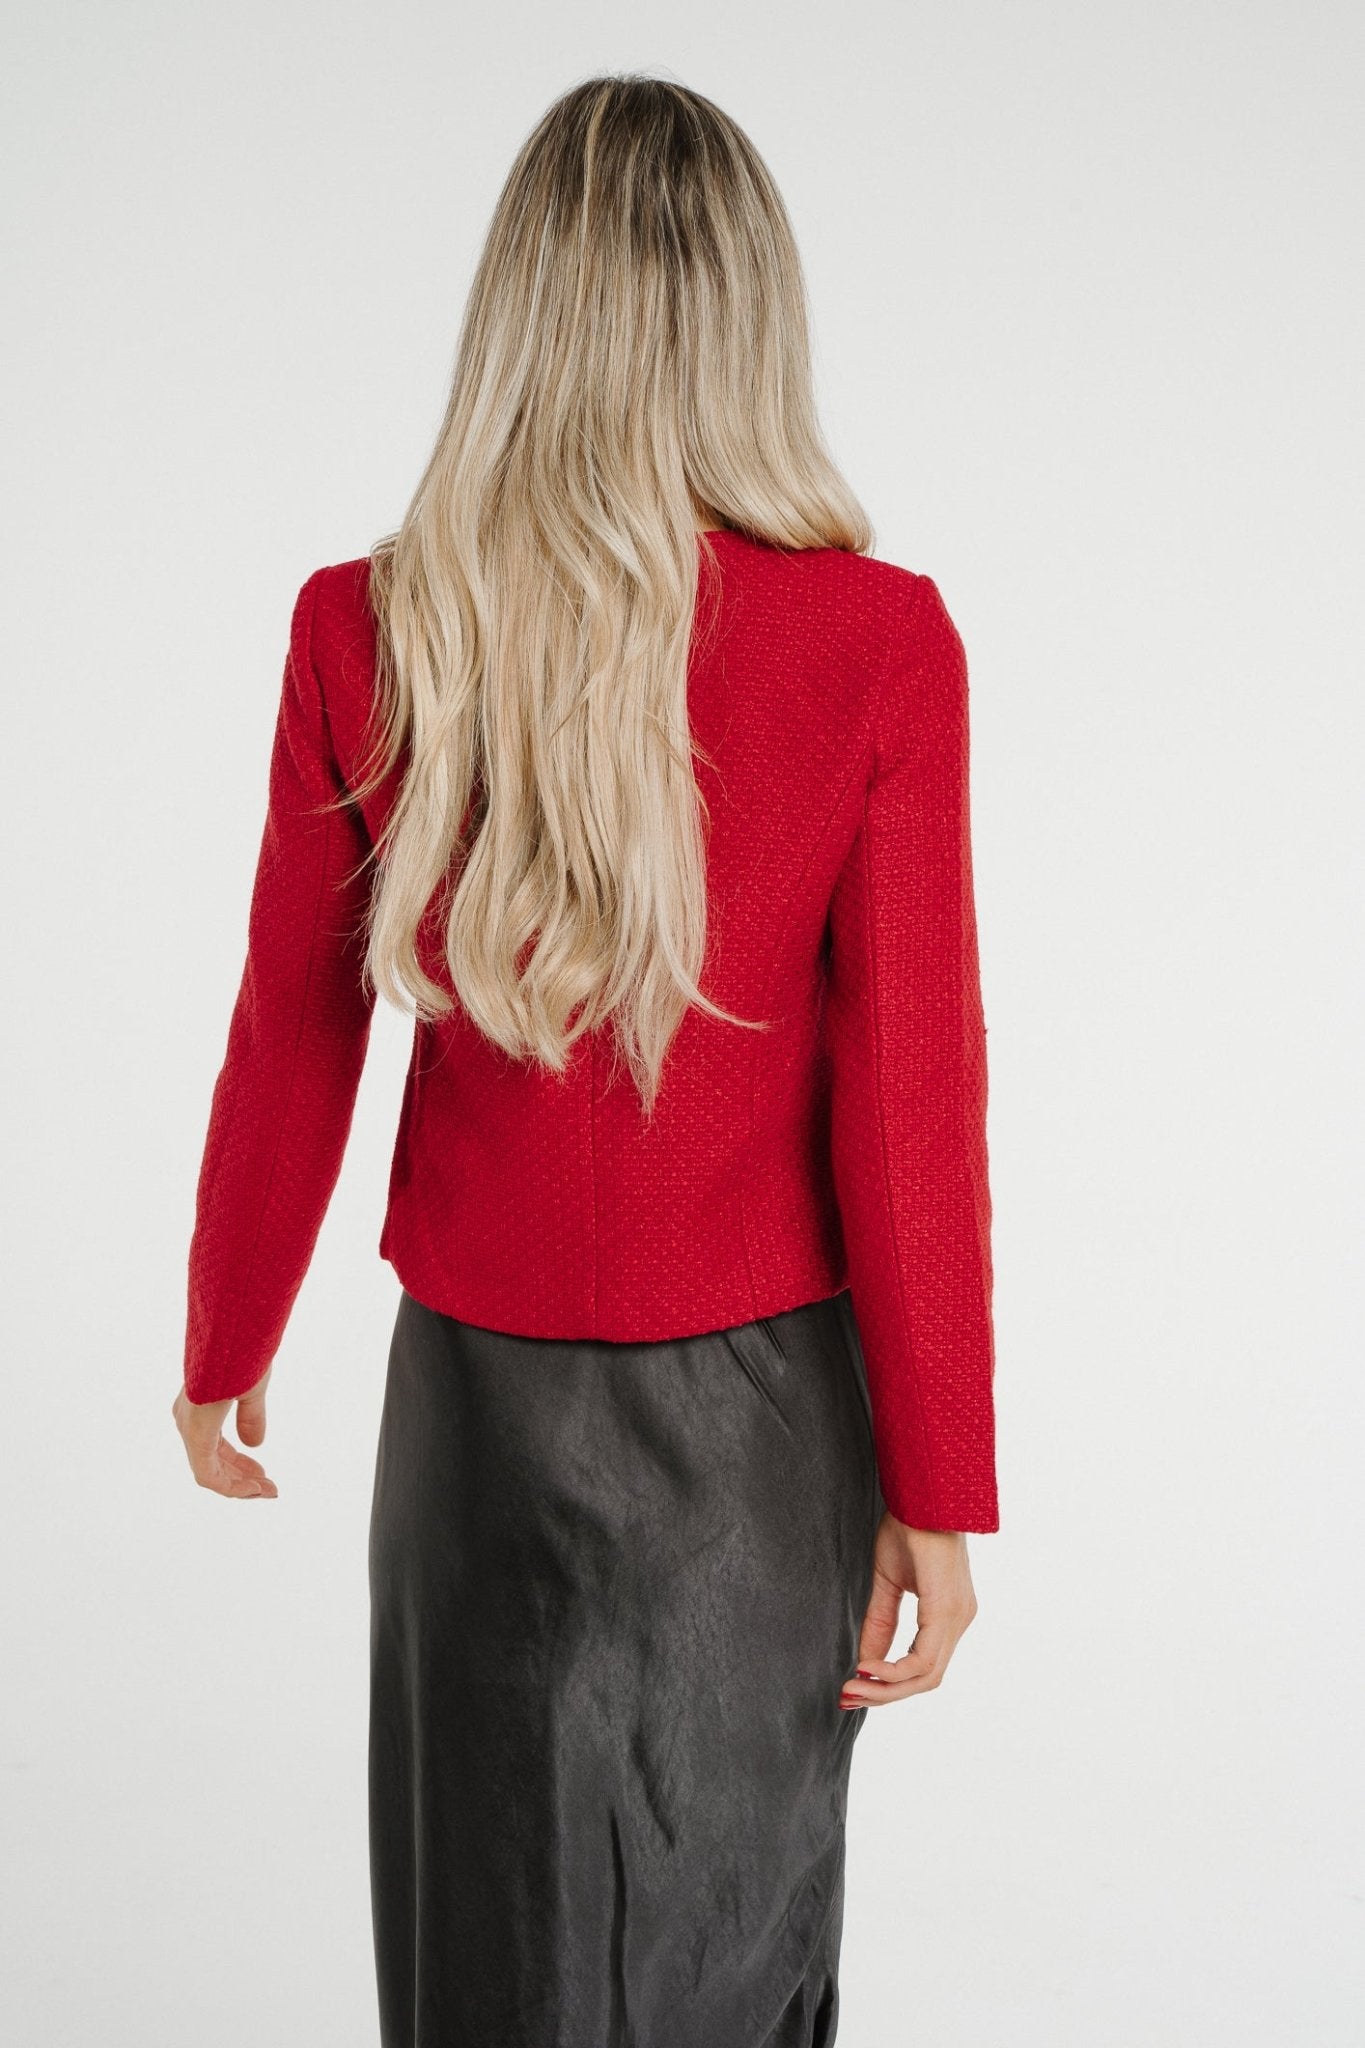 Polly Tweed Jacket In Red - The Walk in Wardrobe